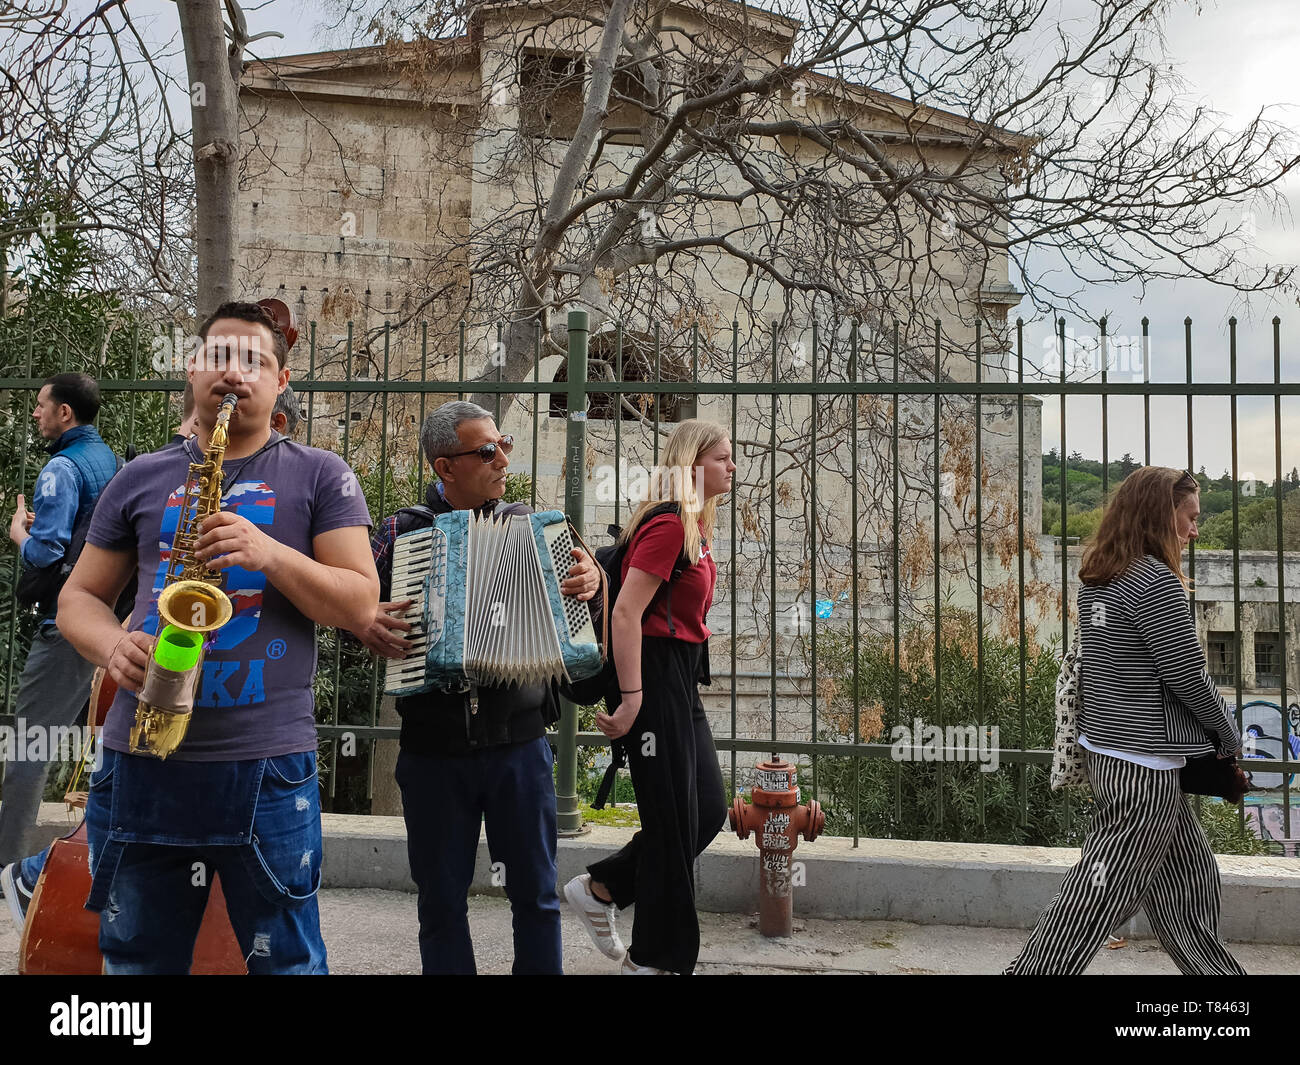 Athens, Greece - March 9, 2019: Street musicians play music at Adrianou Steet in Monastiraki as tourists pass by with Stoa of Attalos monument in the  Stock Photo